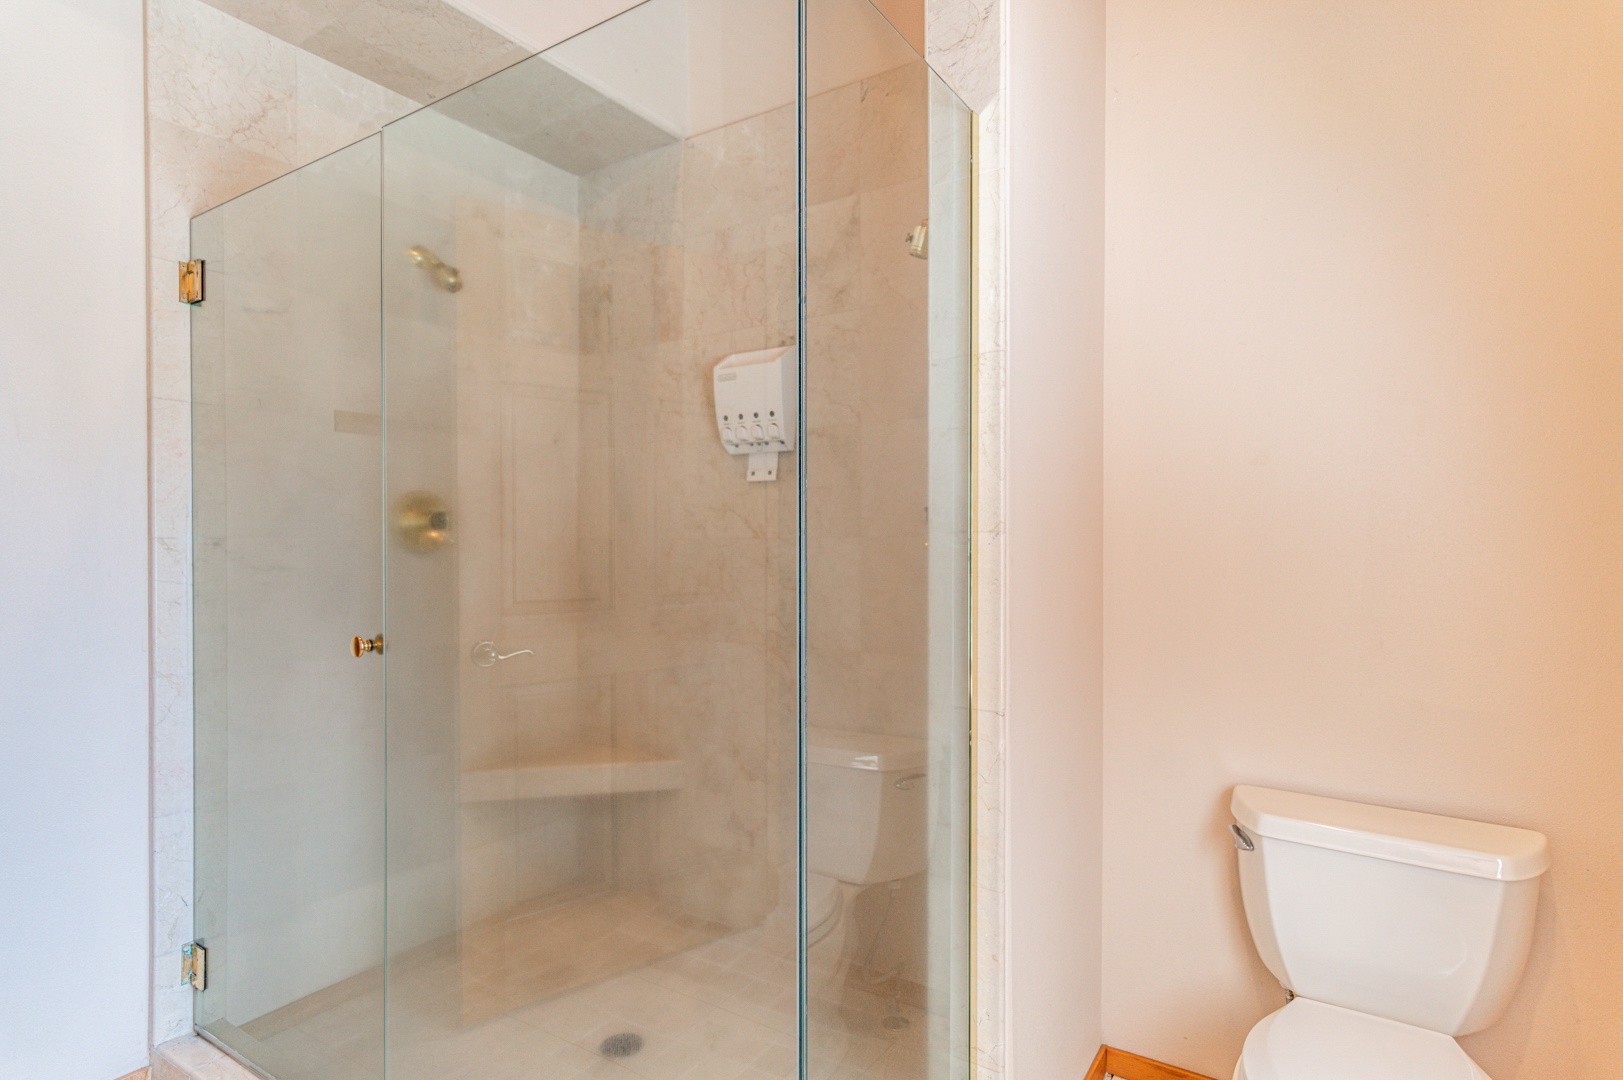 Primary ensuite with glass shower